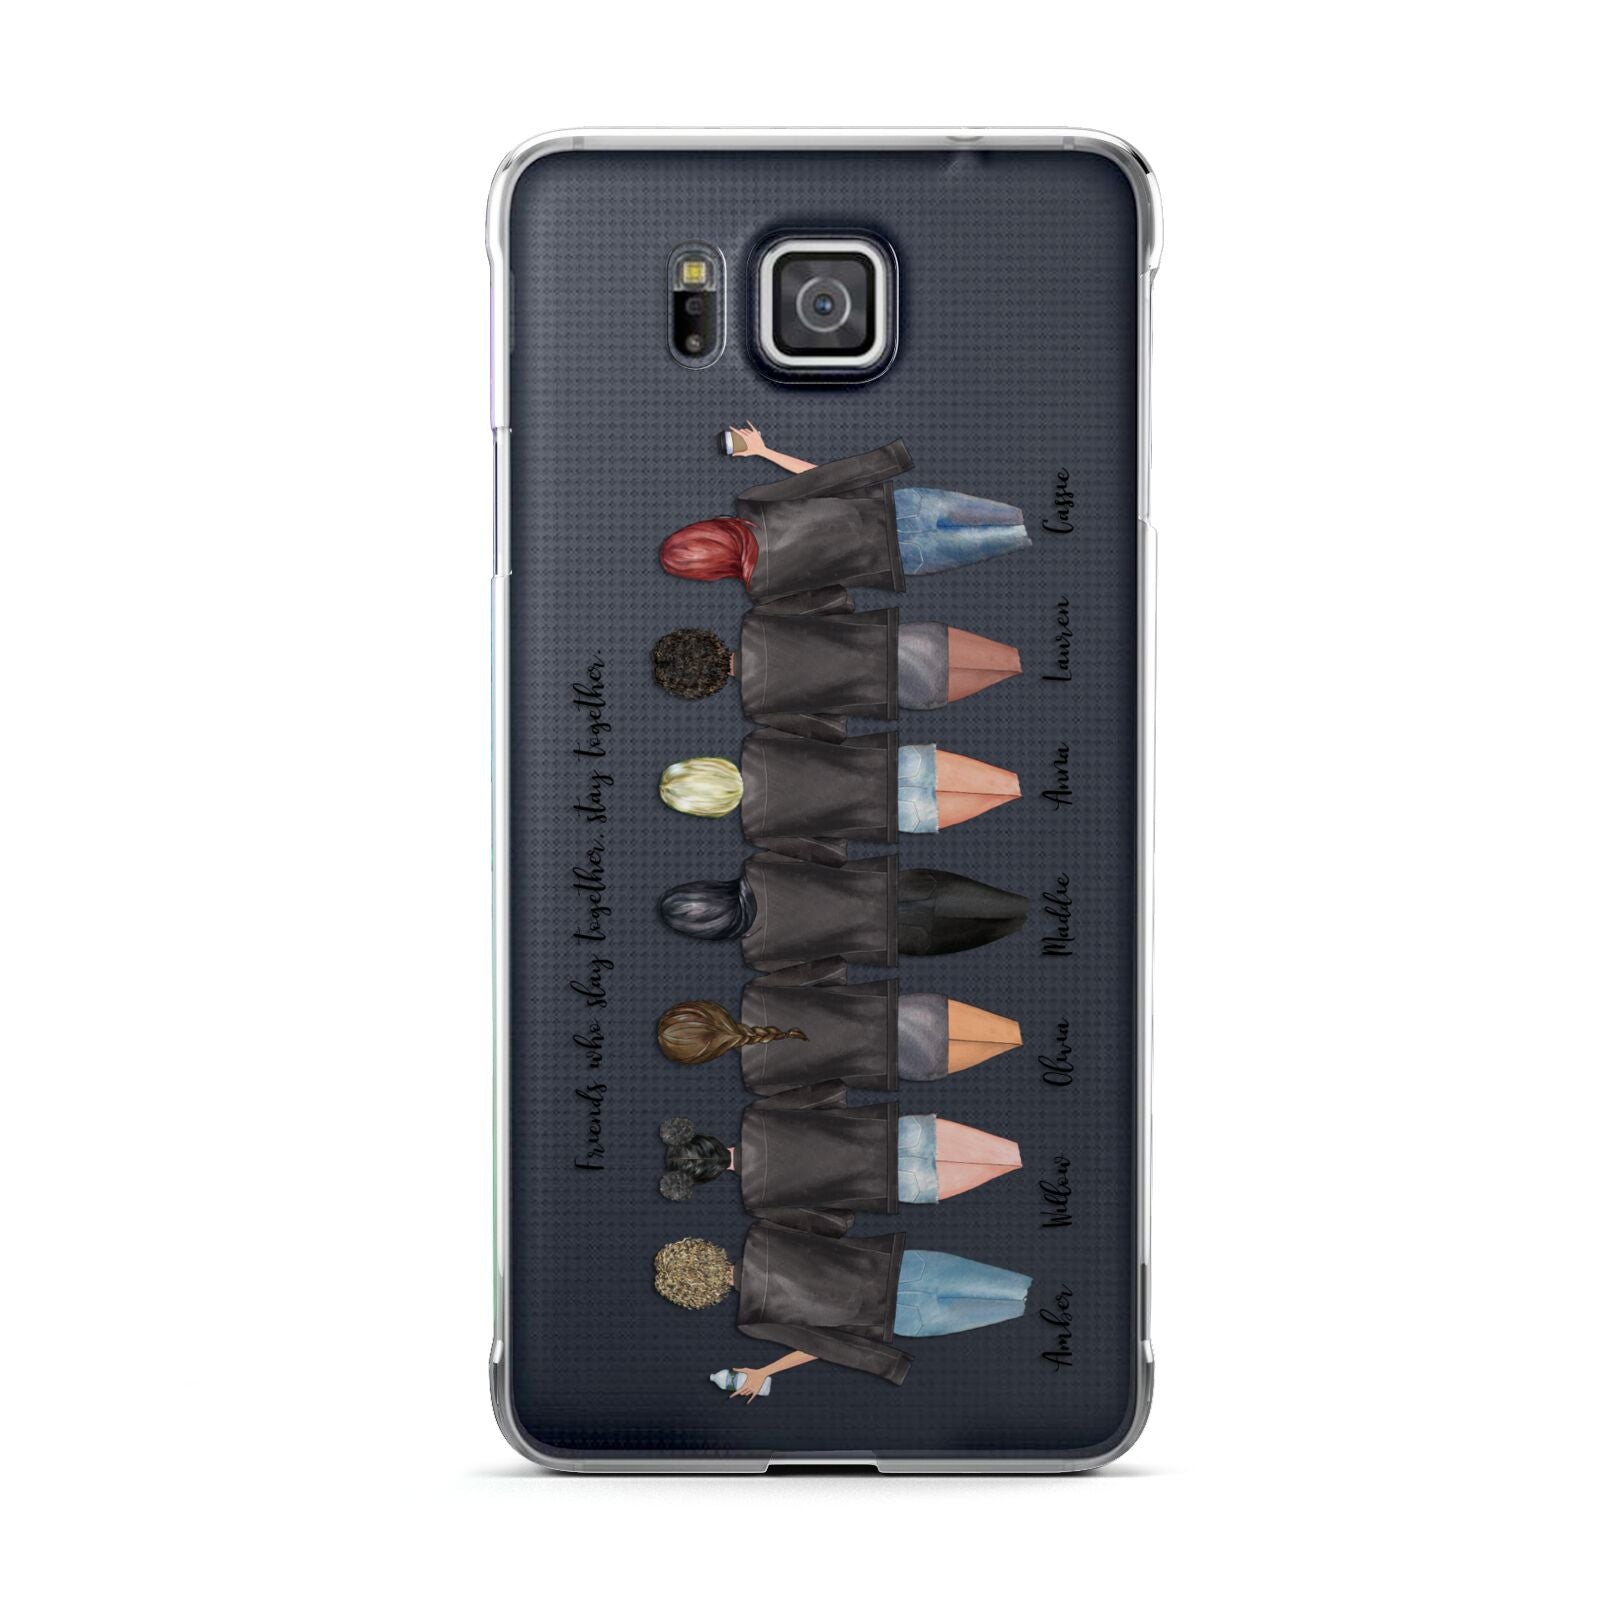 7 Best Friends with Names Samsung Galaxy Alpha Case